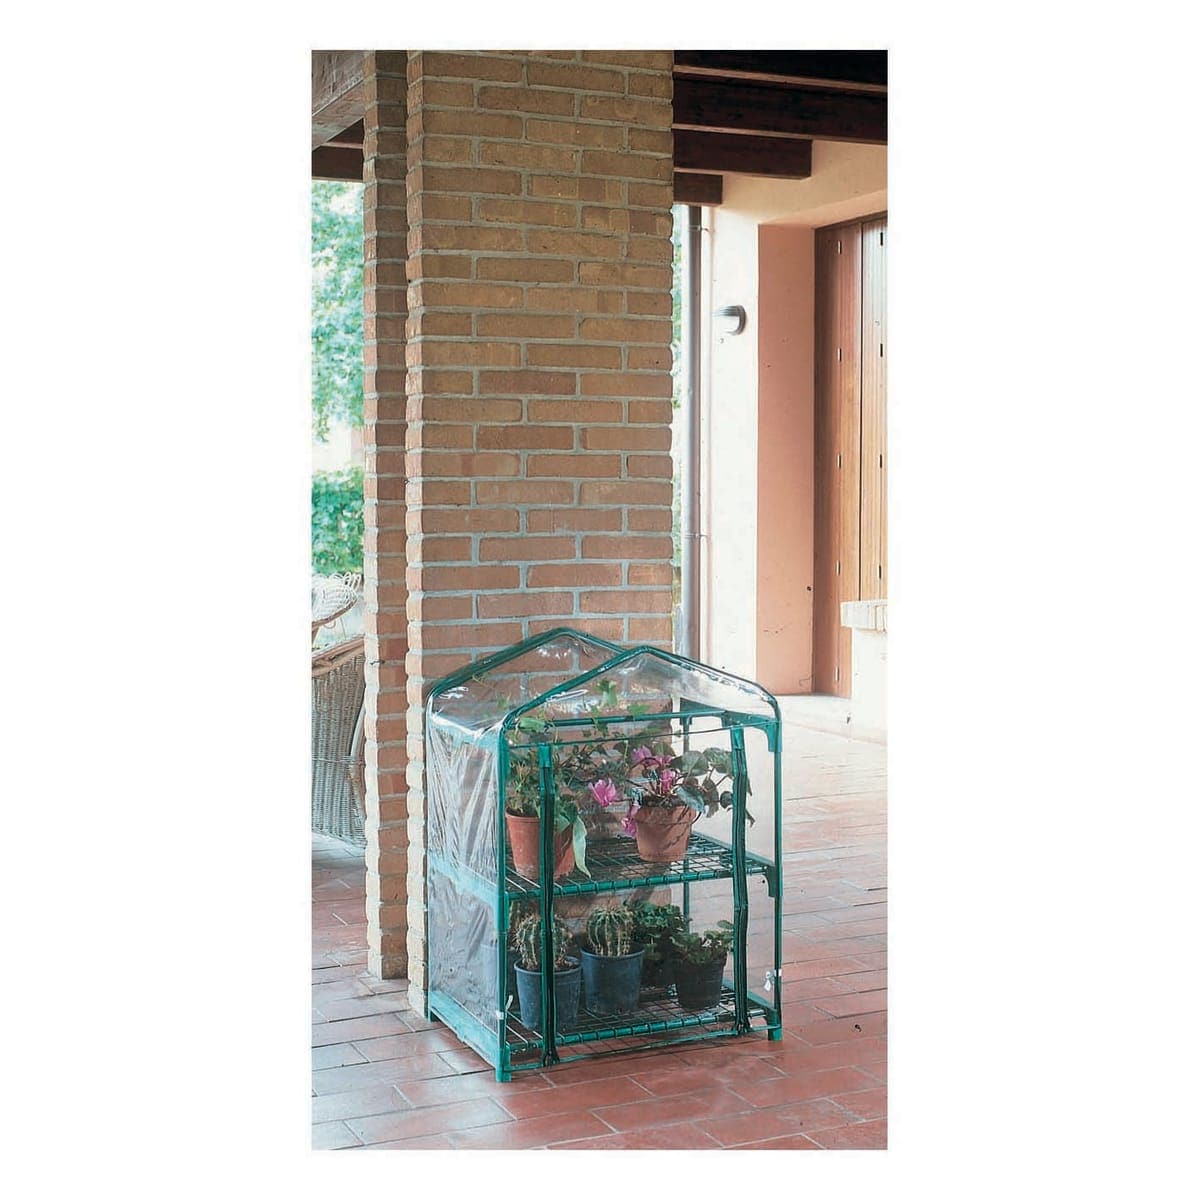 REPLACEMENT GREENHOUSE COVER 2 SHELVES 570317 - best price from Maltashopper.com BR500570318